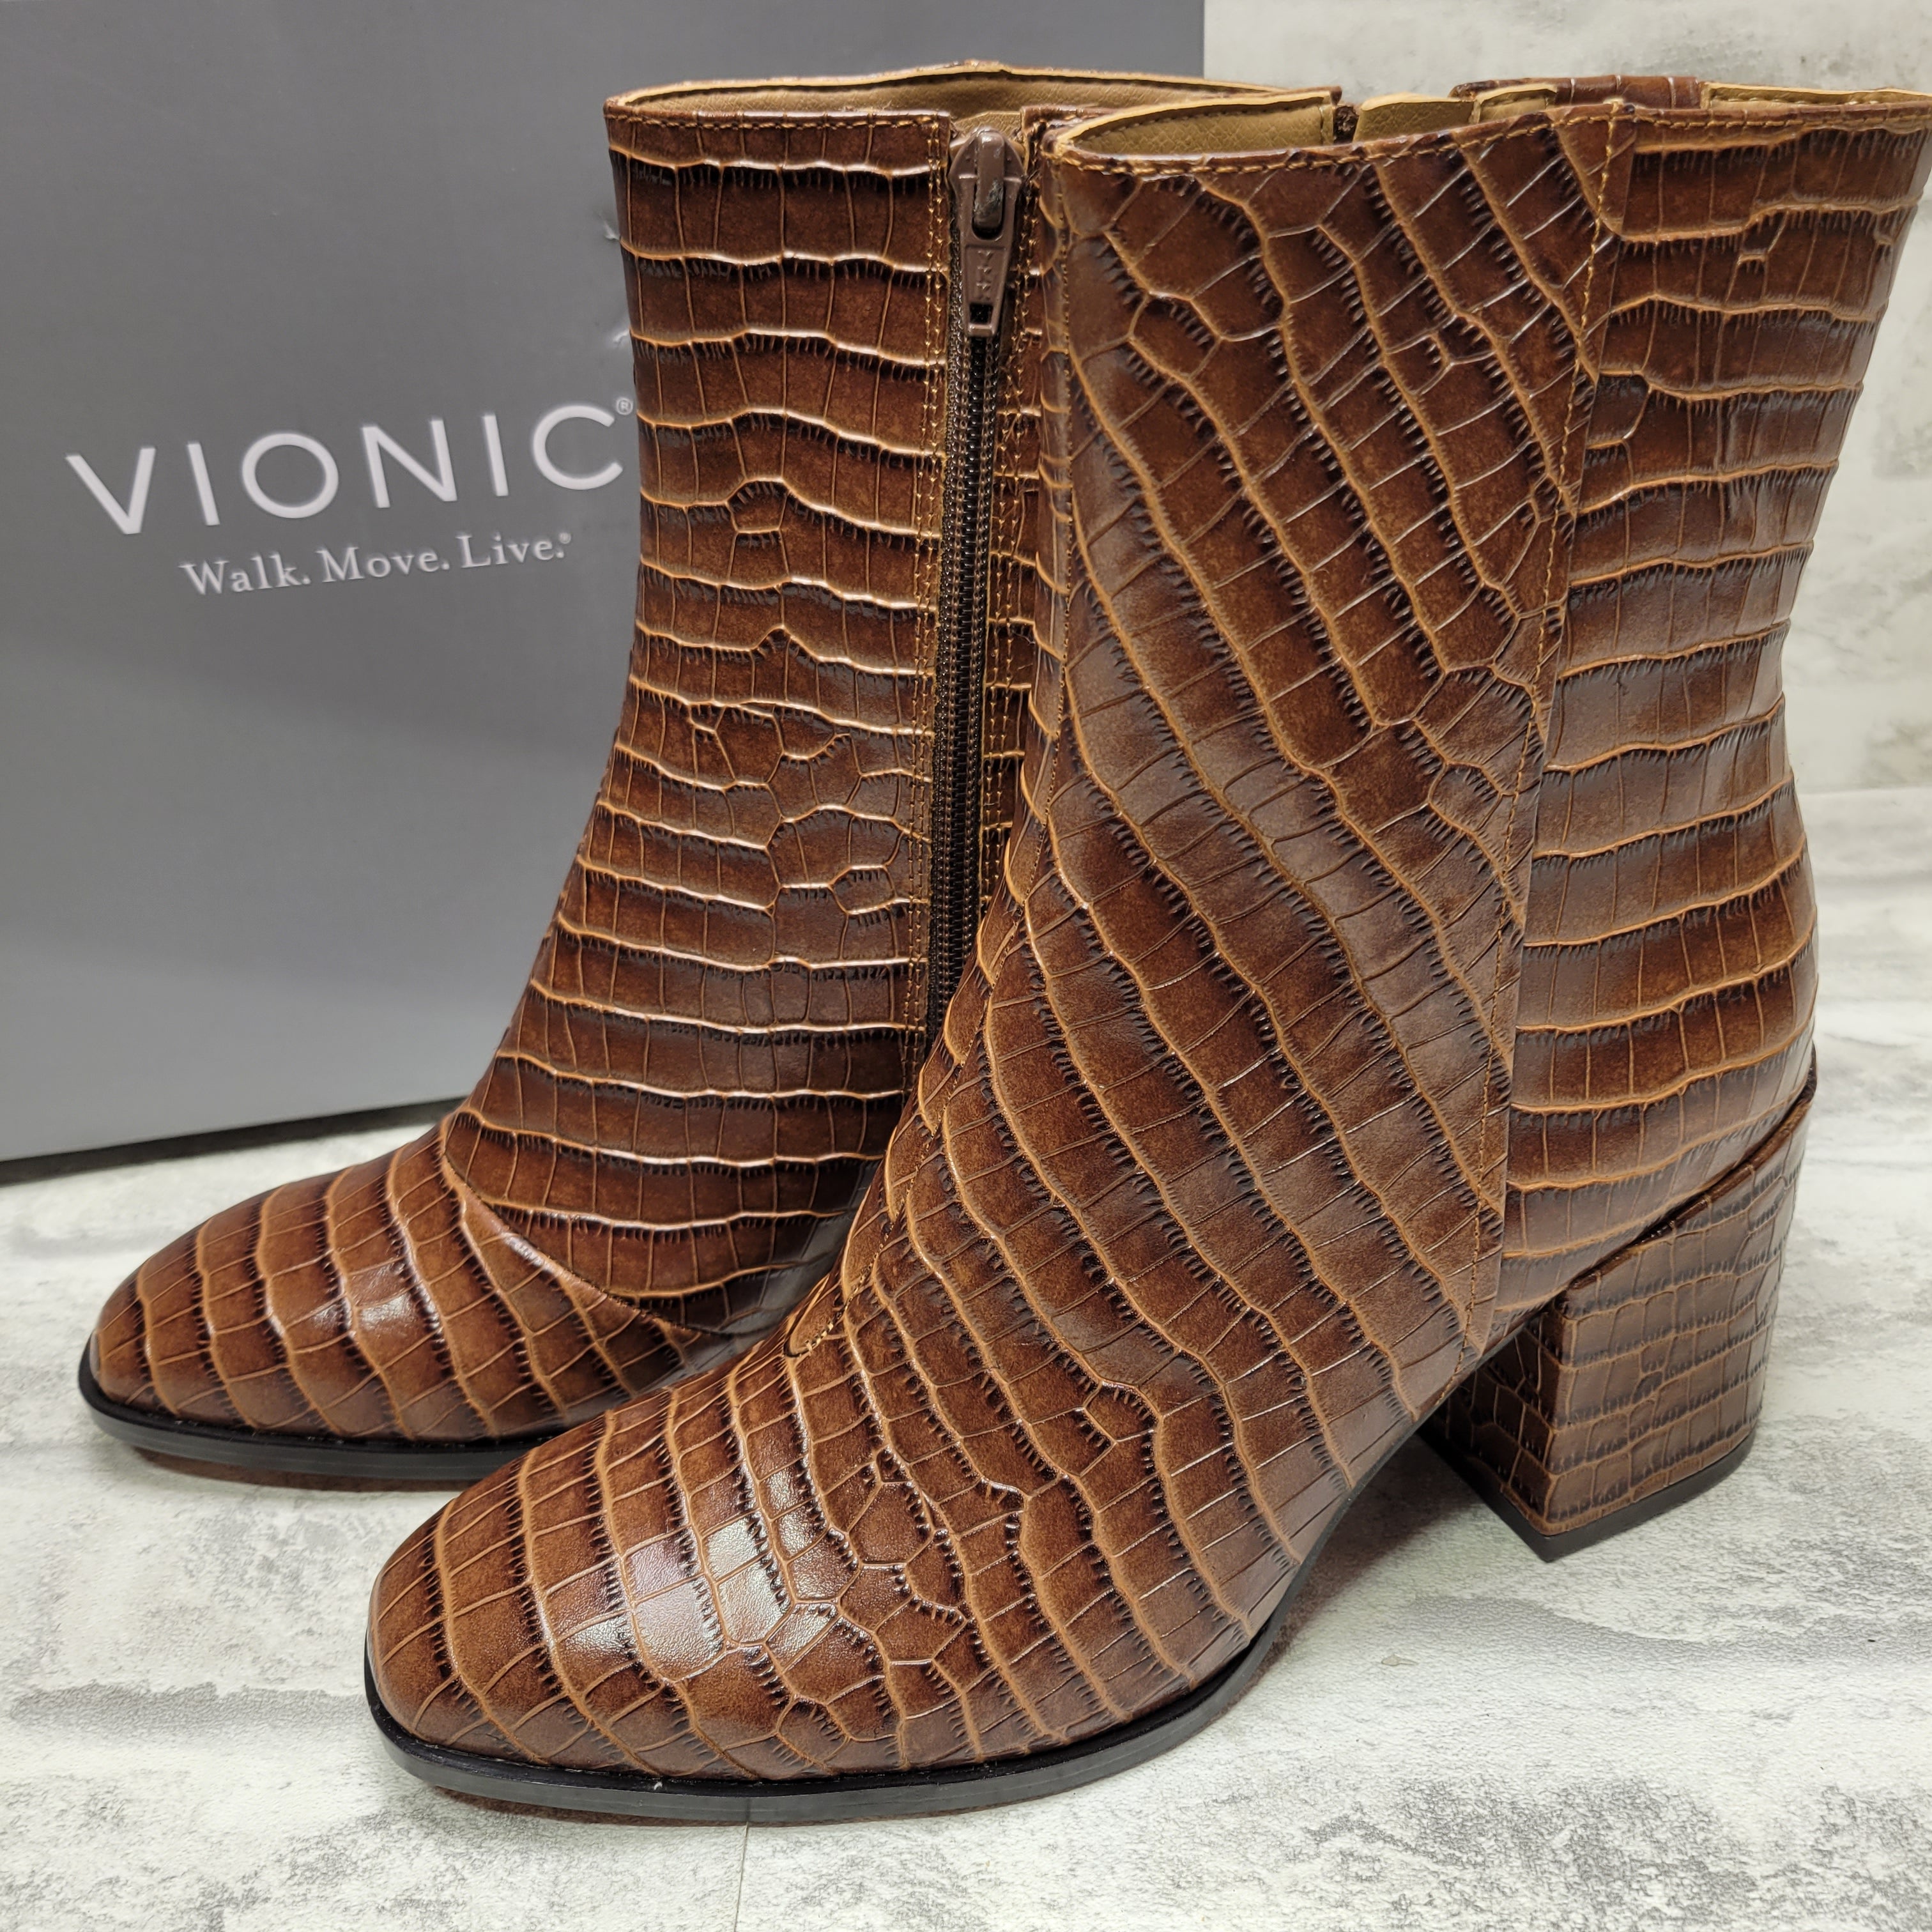 Vionic Women's Vienna Harper Zipper Ankle Boot-Supportive Heeled Boots Brown 6.5 (7774565794030)